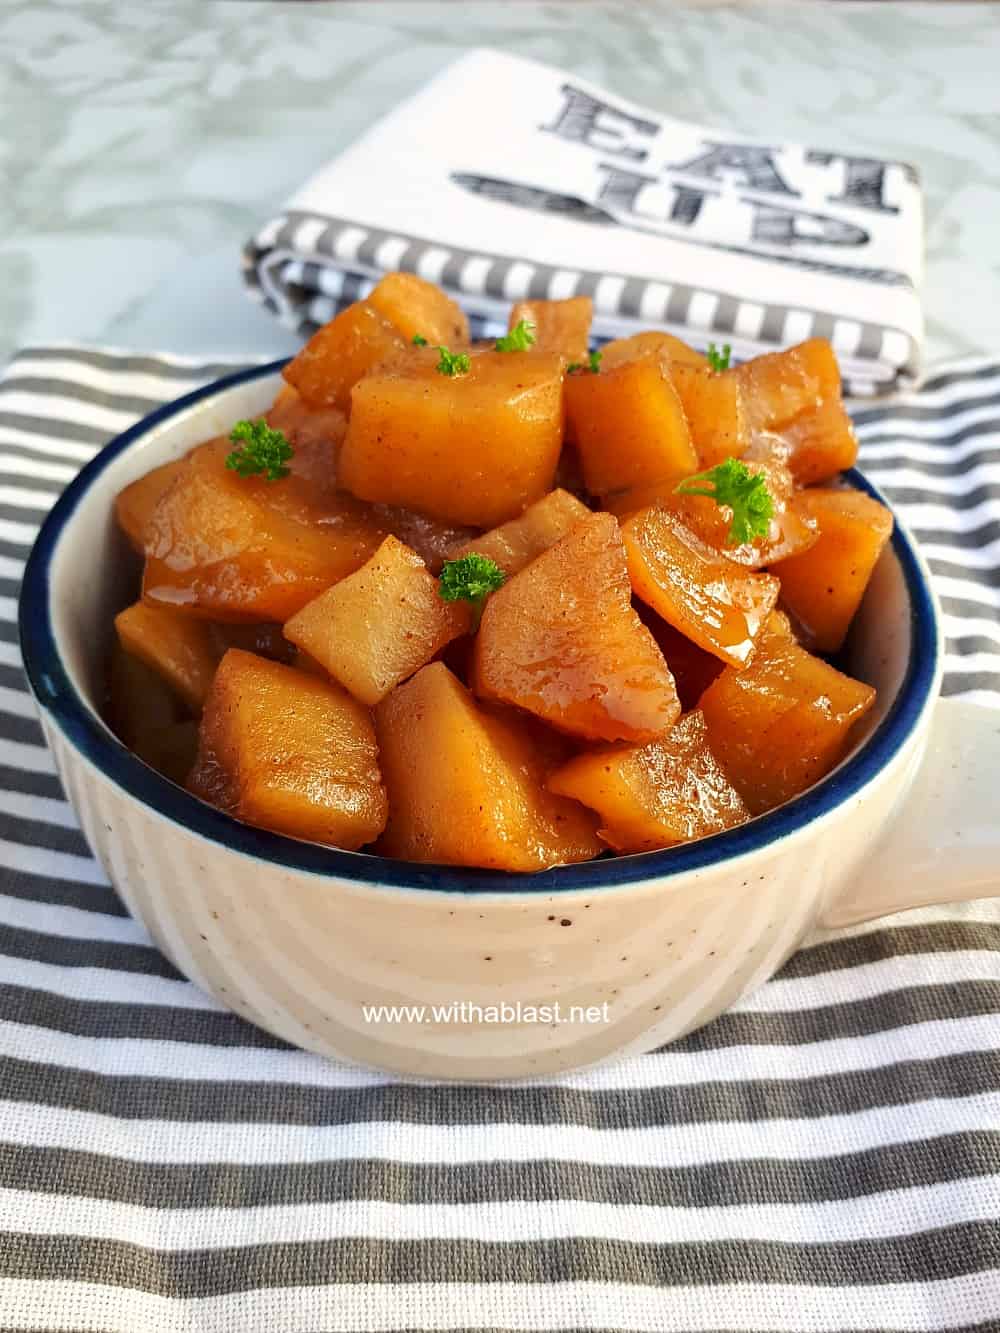 Best Sweet Potatoes Ever just like gran used to make ! Candied Sweet Potatoes are one of the best side dishes ever with a light cinnamon flavor.